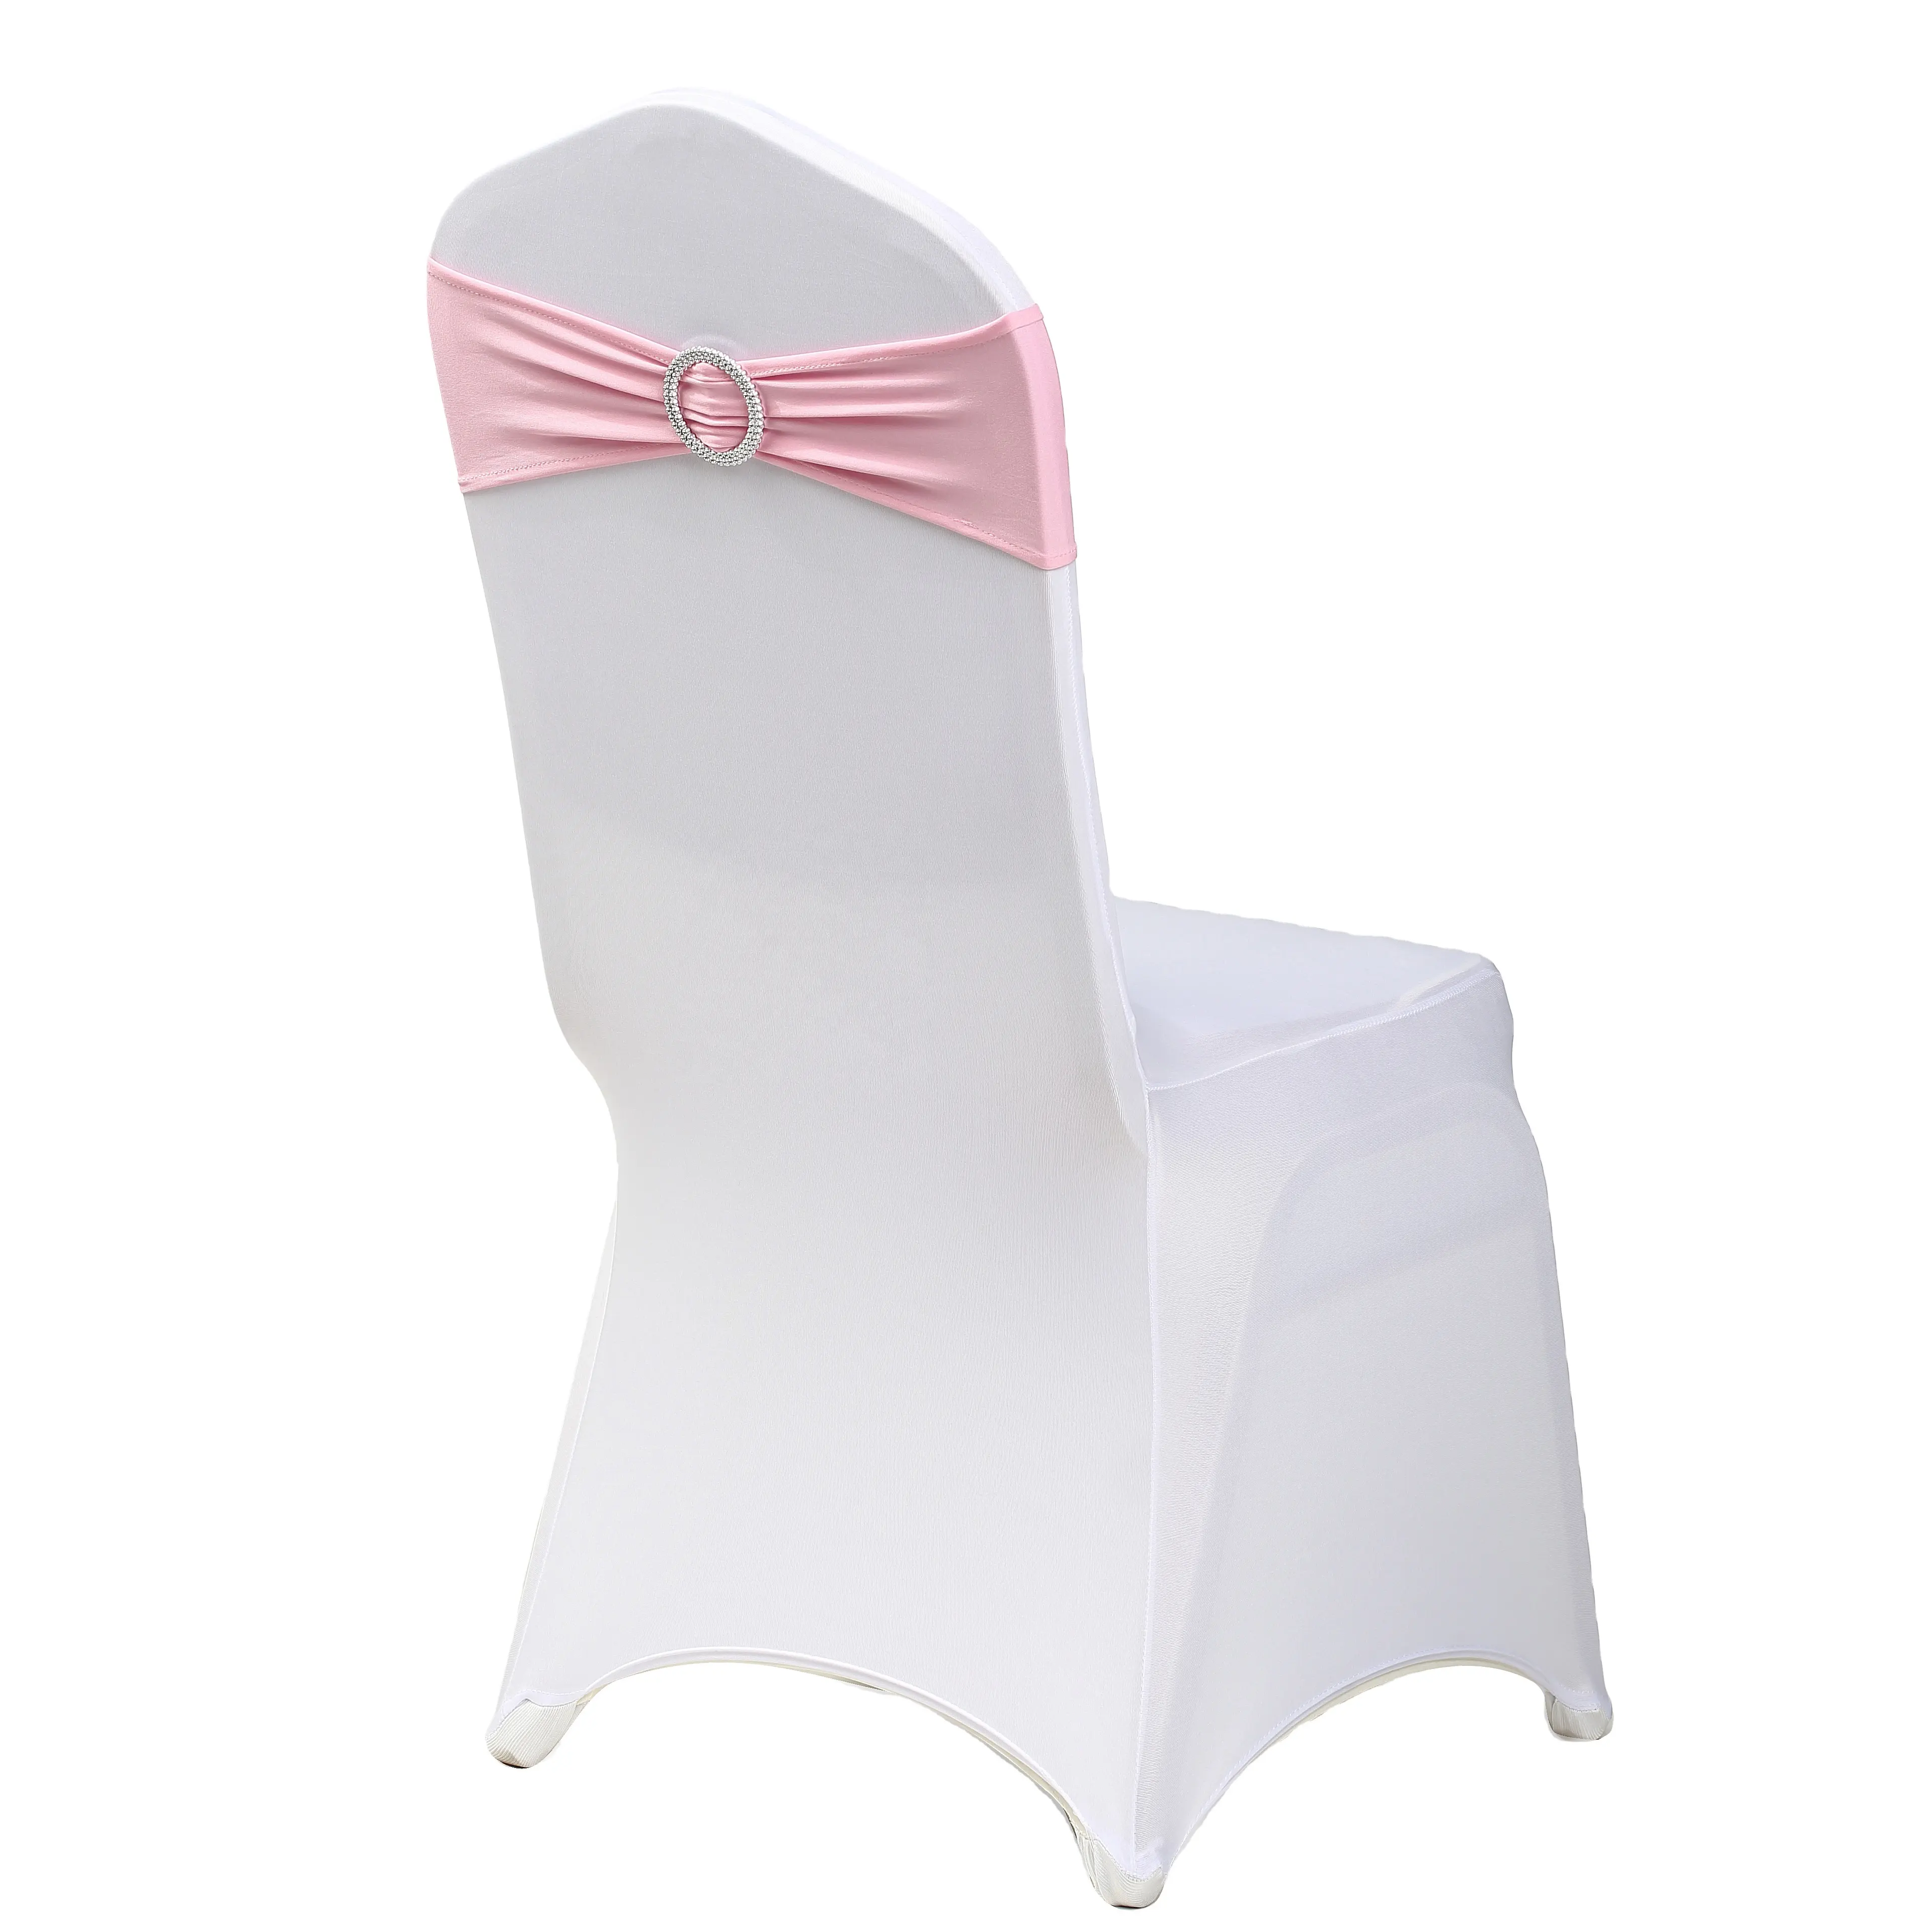 Wedding Chair Decorations Stretch Chair Bows and Sashes for Party Ceremony Reception Banquet Spandex Chair Covers slipcovers